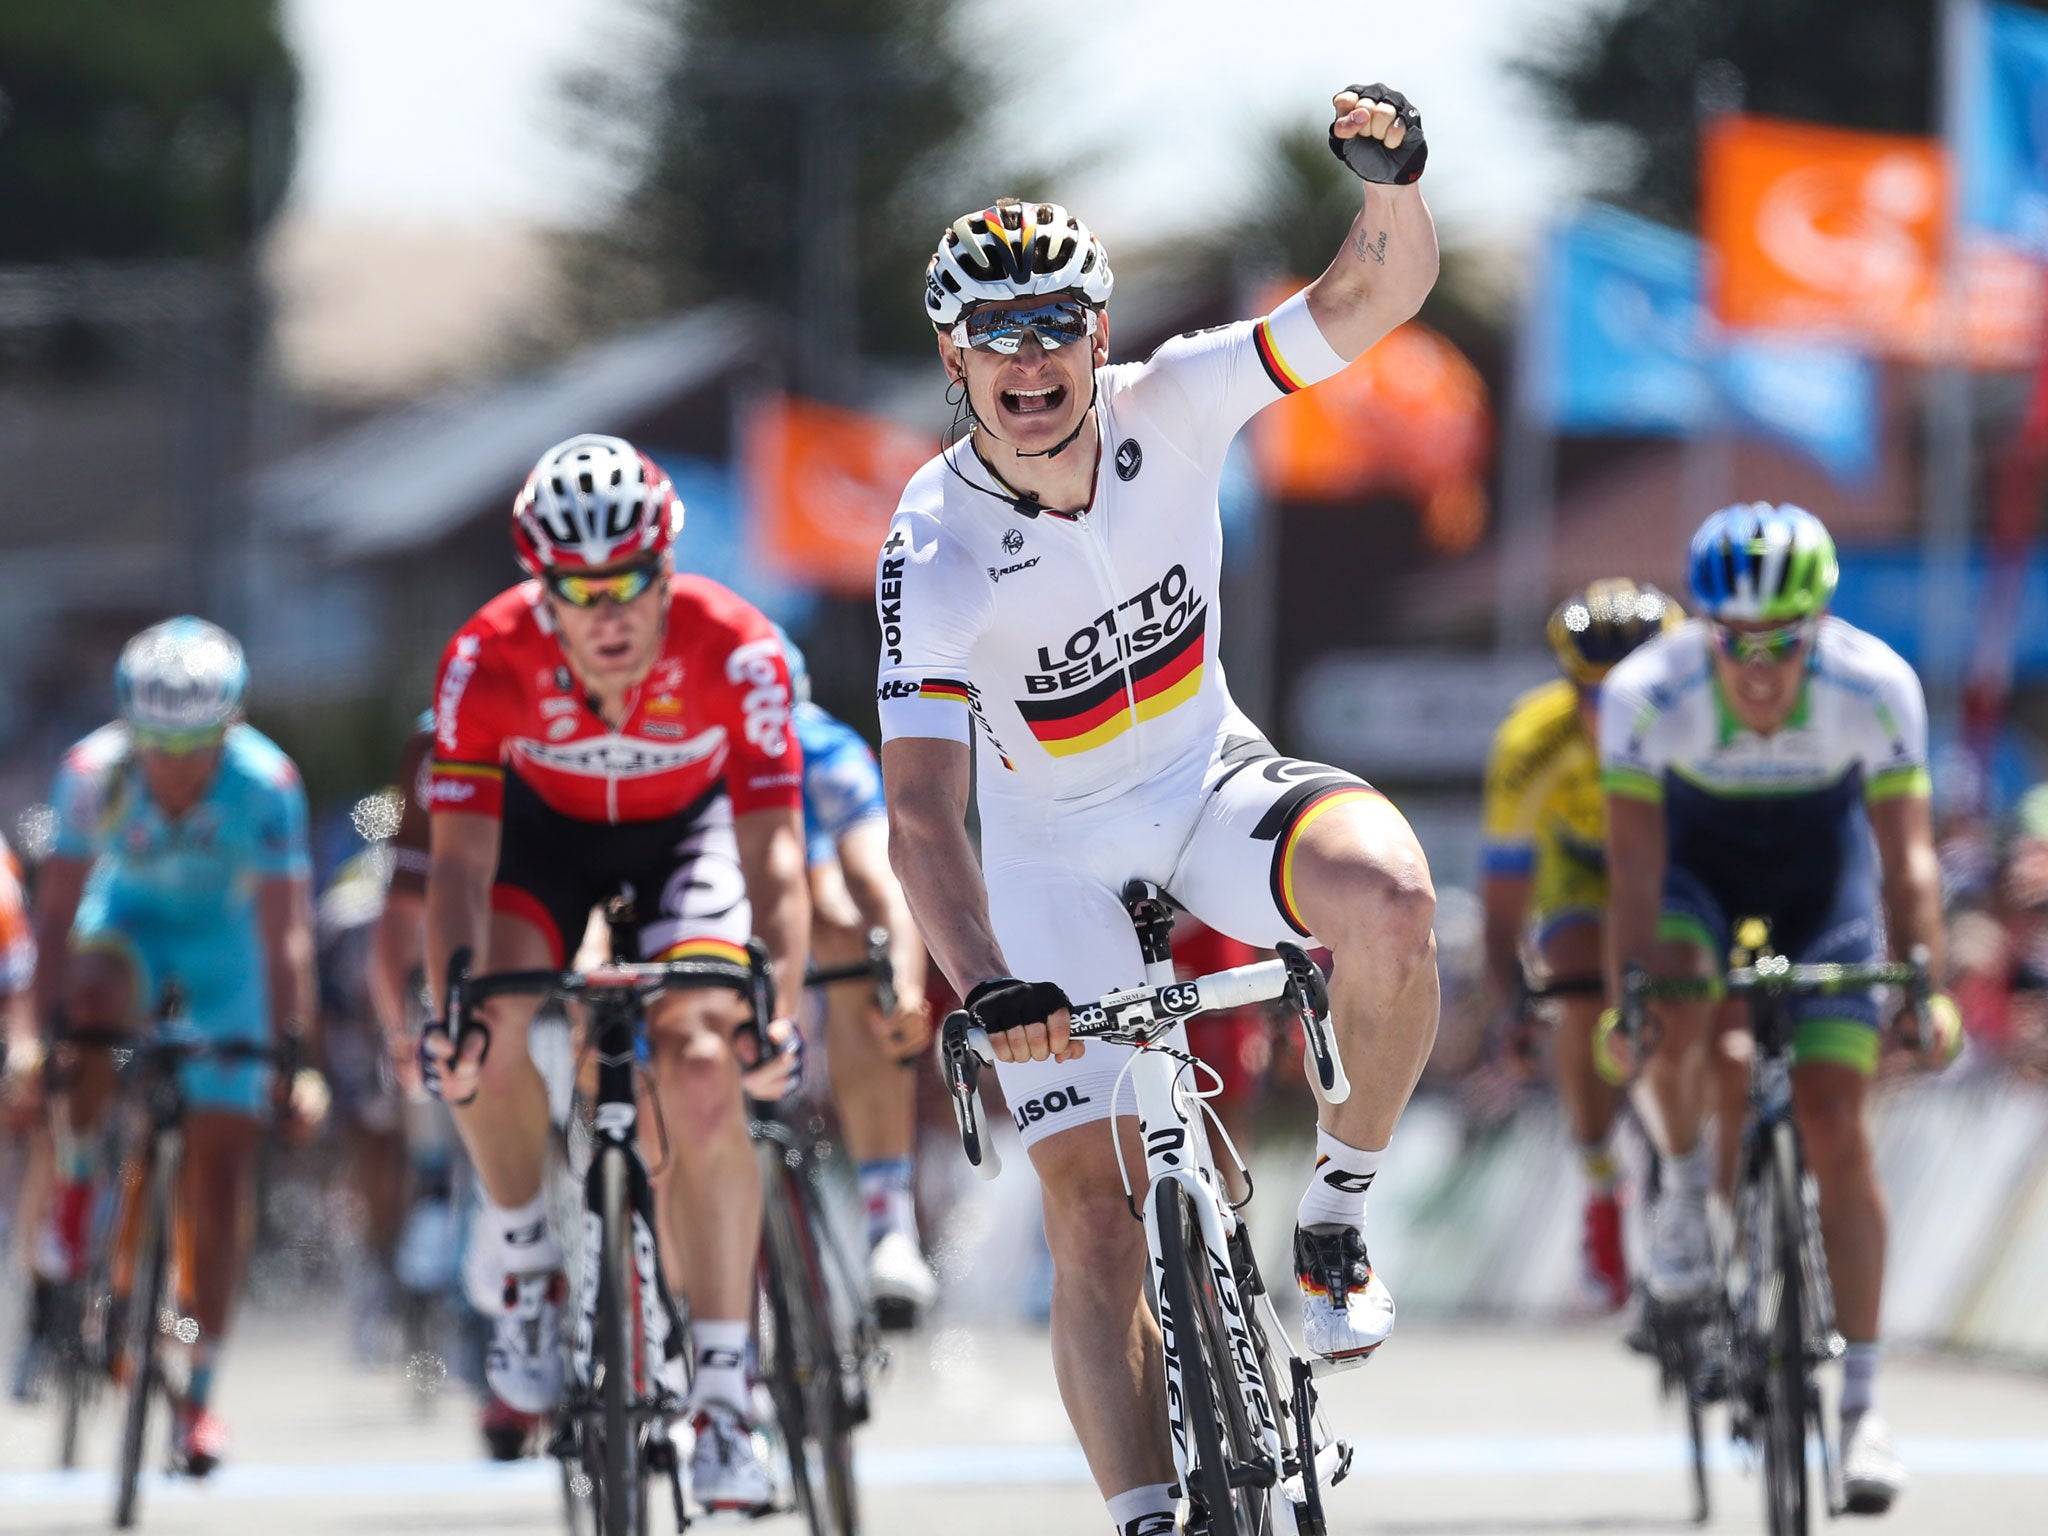 Andre Greipel takes victory on the Tour Down Under